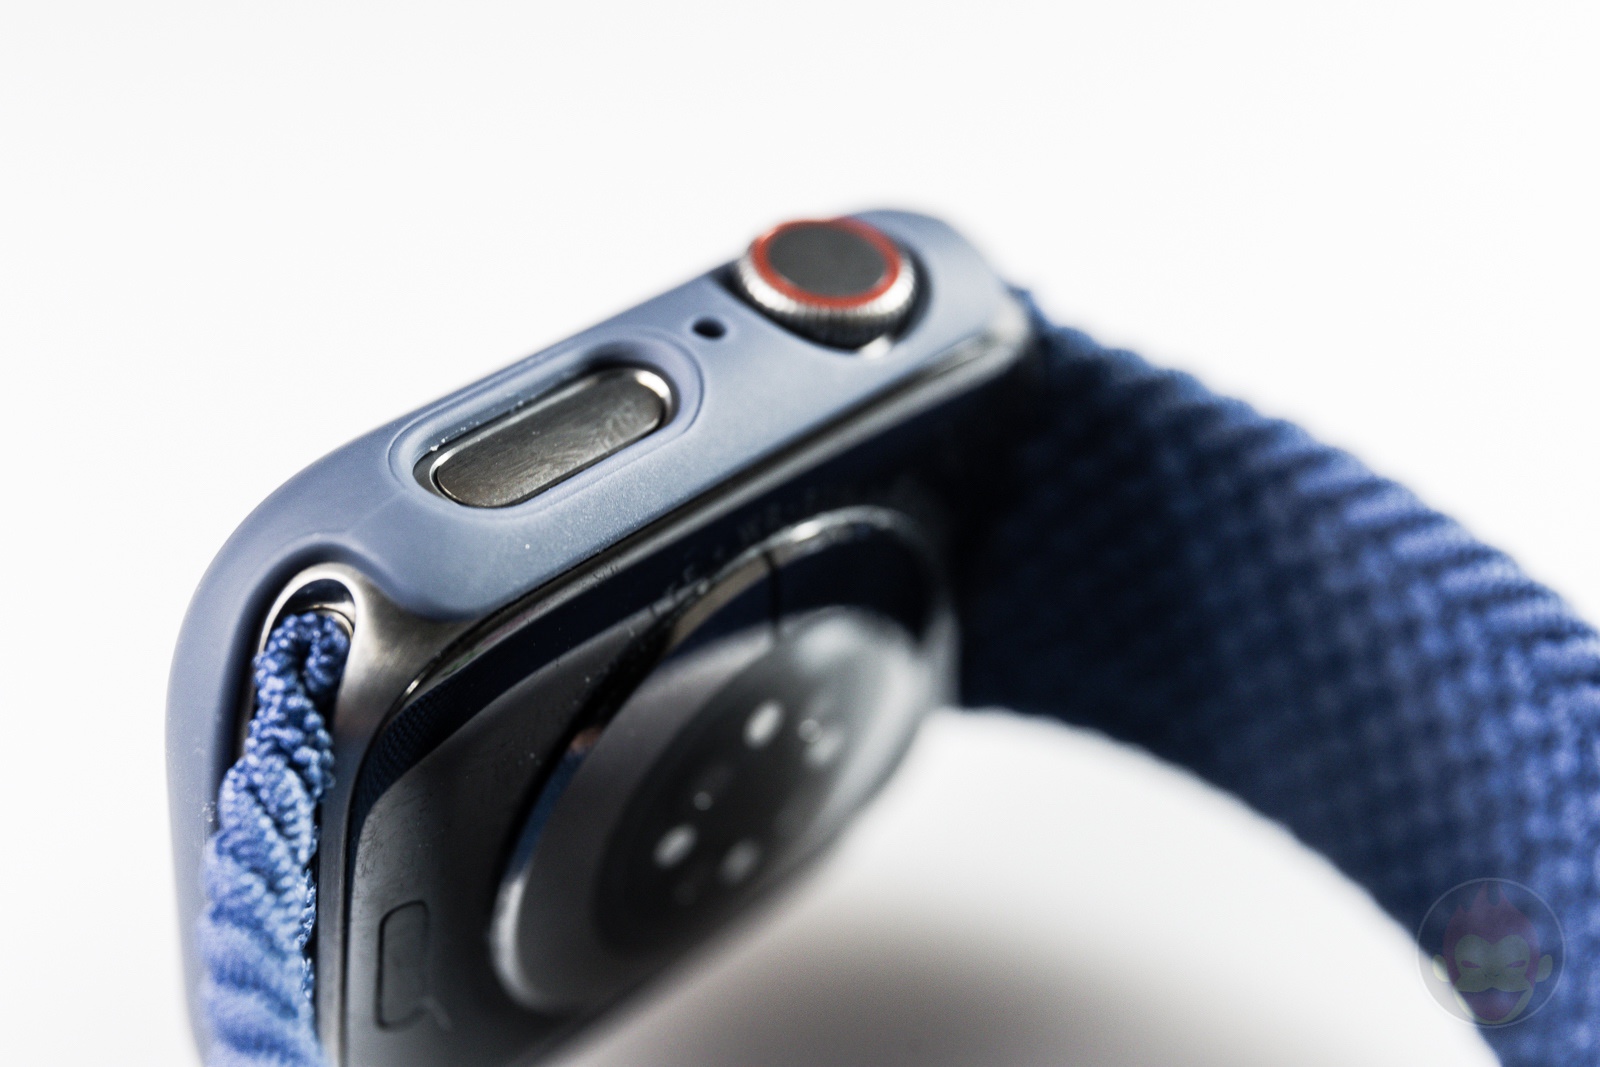 Reflying Apple Watch Case Review 05